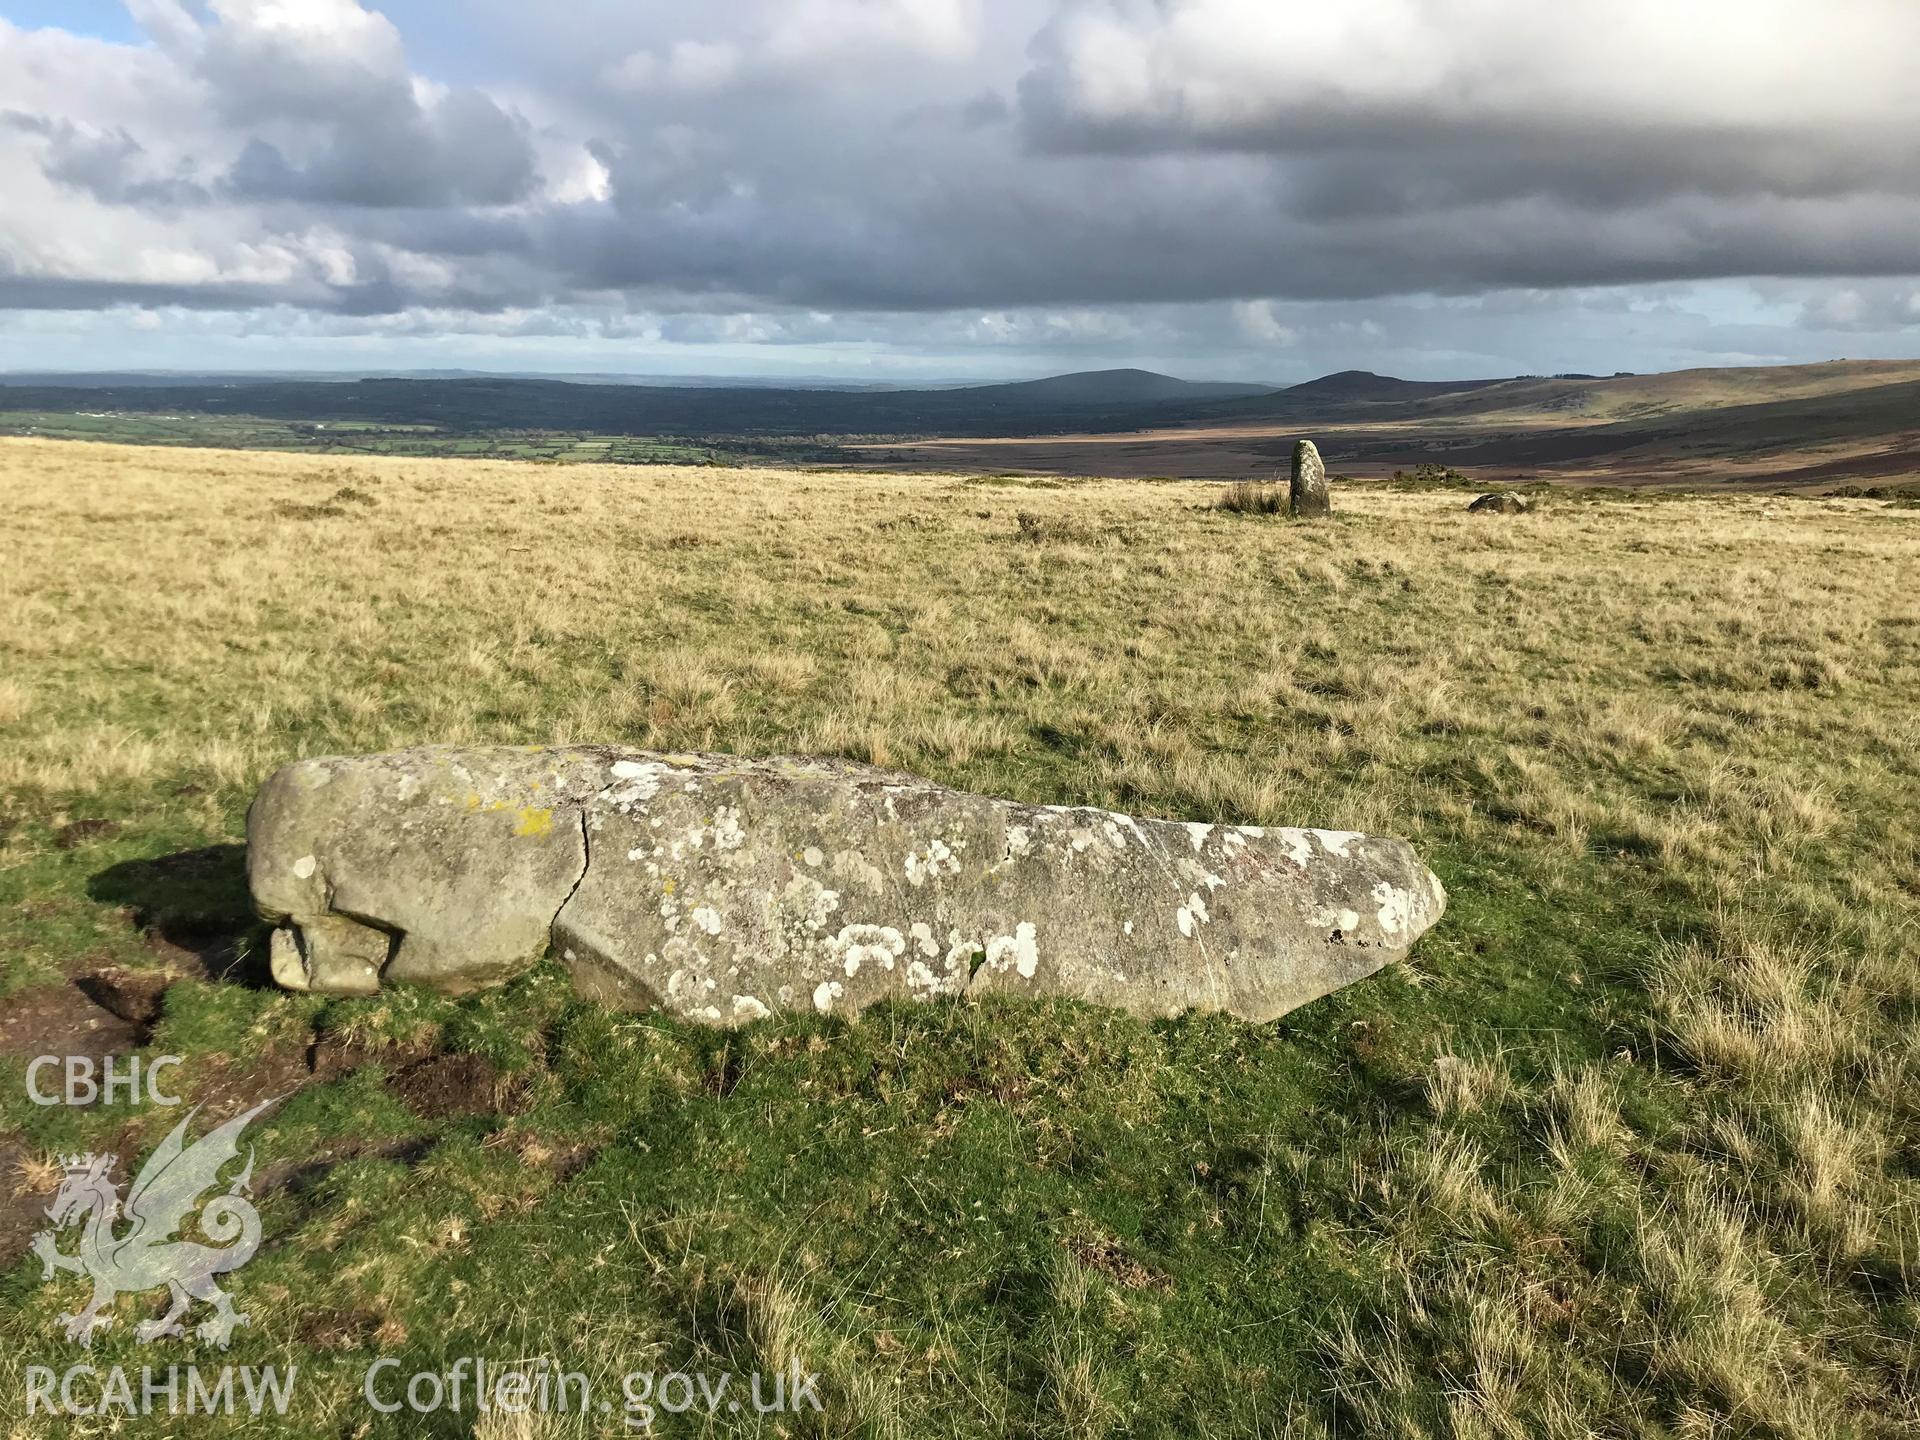 Digital colour photograph showing Waun Mawn standing stone (possible stone circle), Eglwyswrw, taken by Paul Davis on 22nd October 2019.